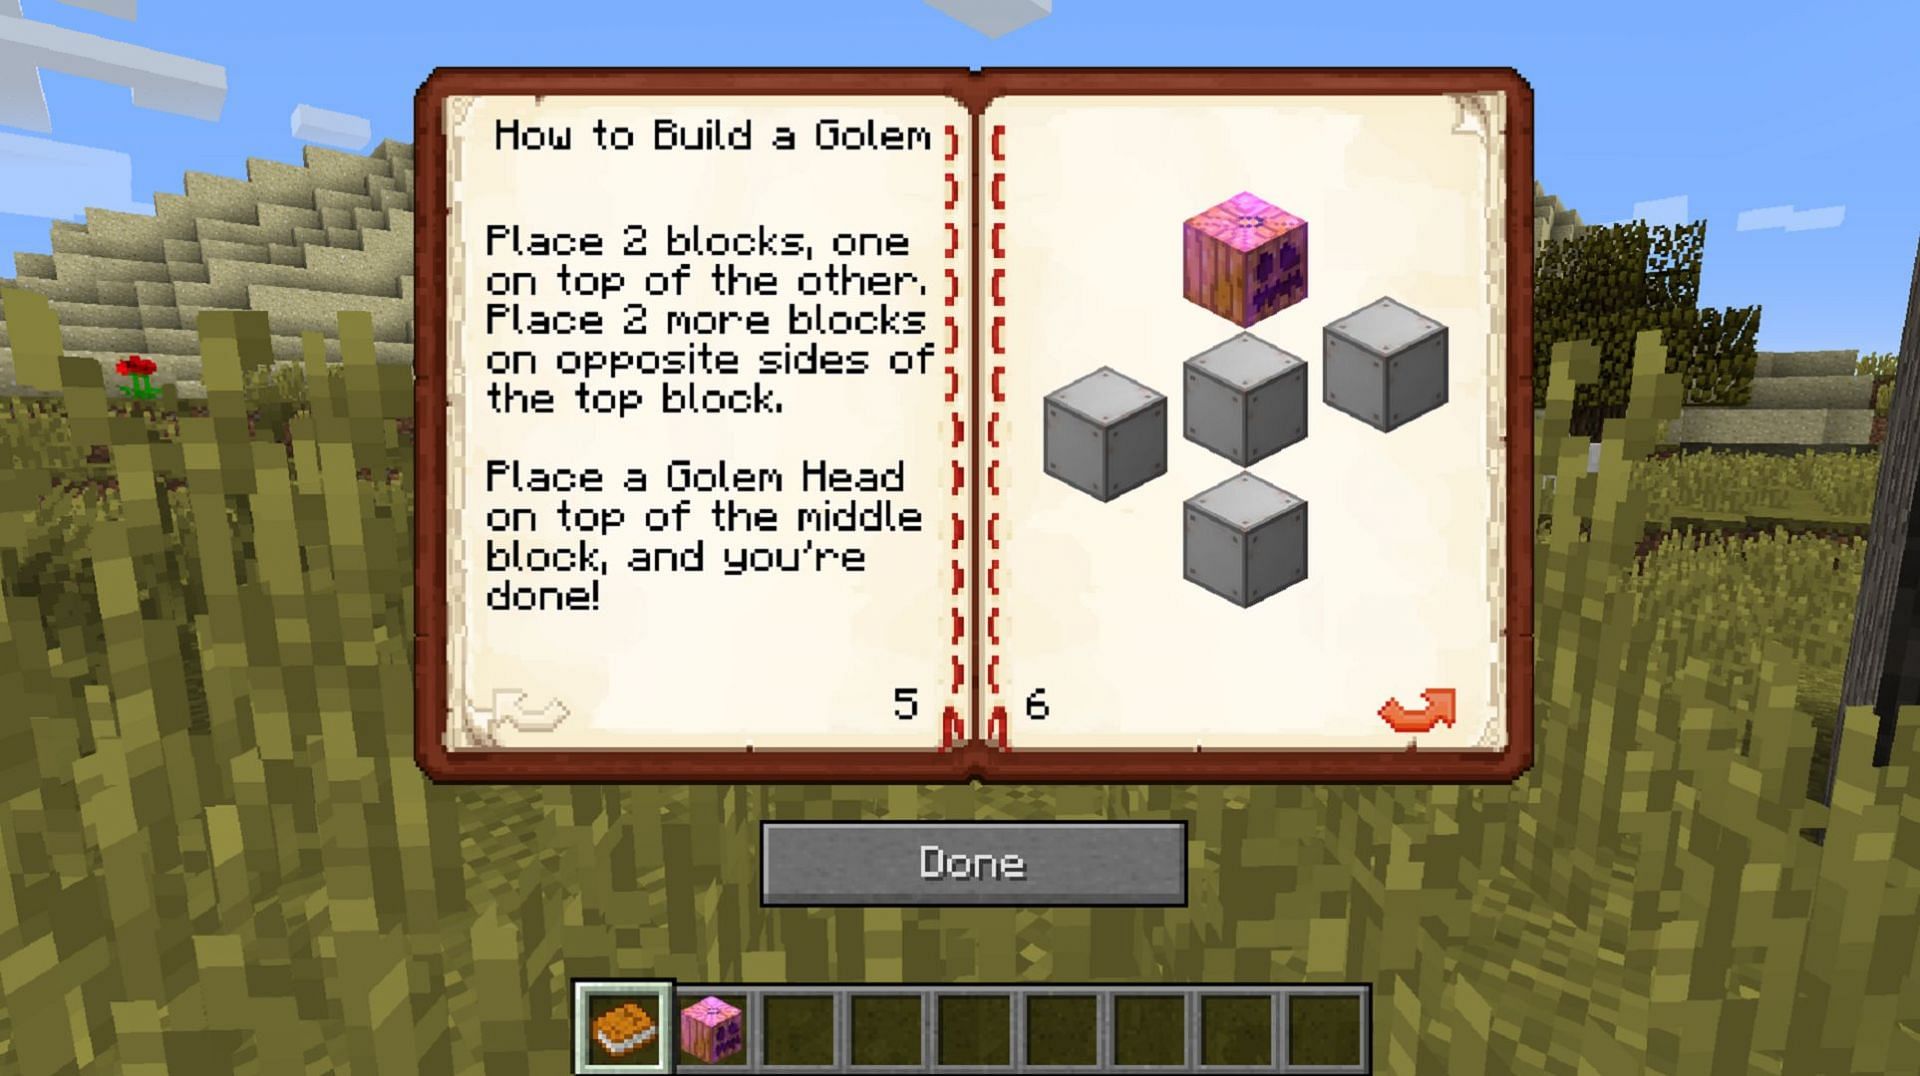 The golem guidebook in the Extra Golems mod (Image via skyjay1/CurseForge)